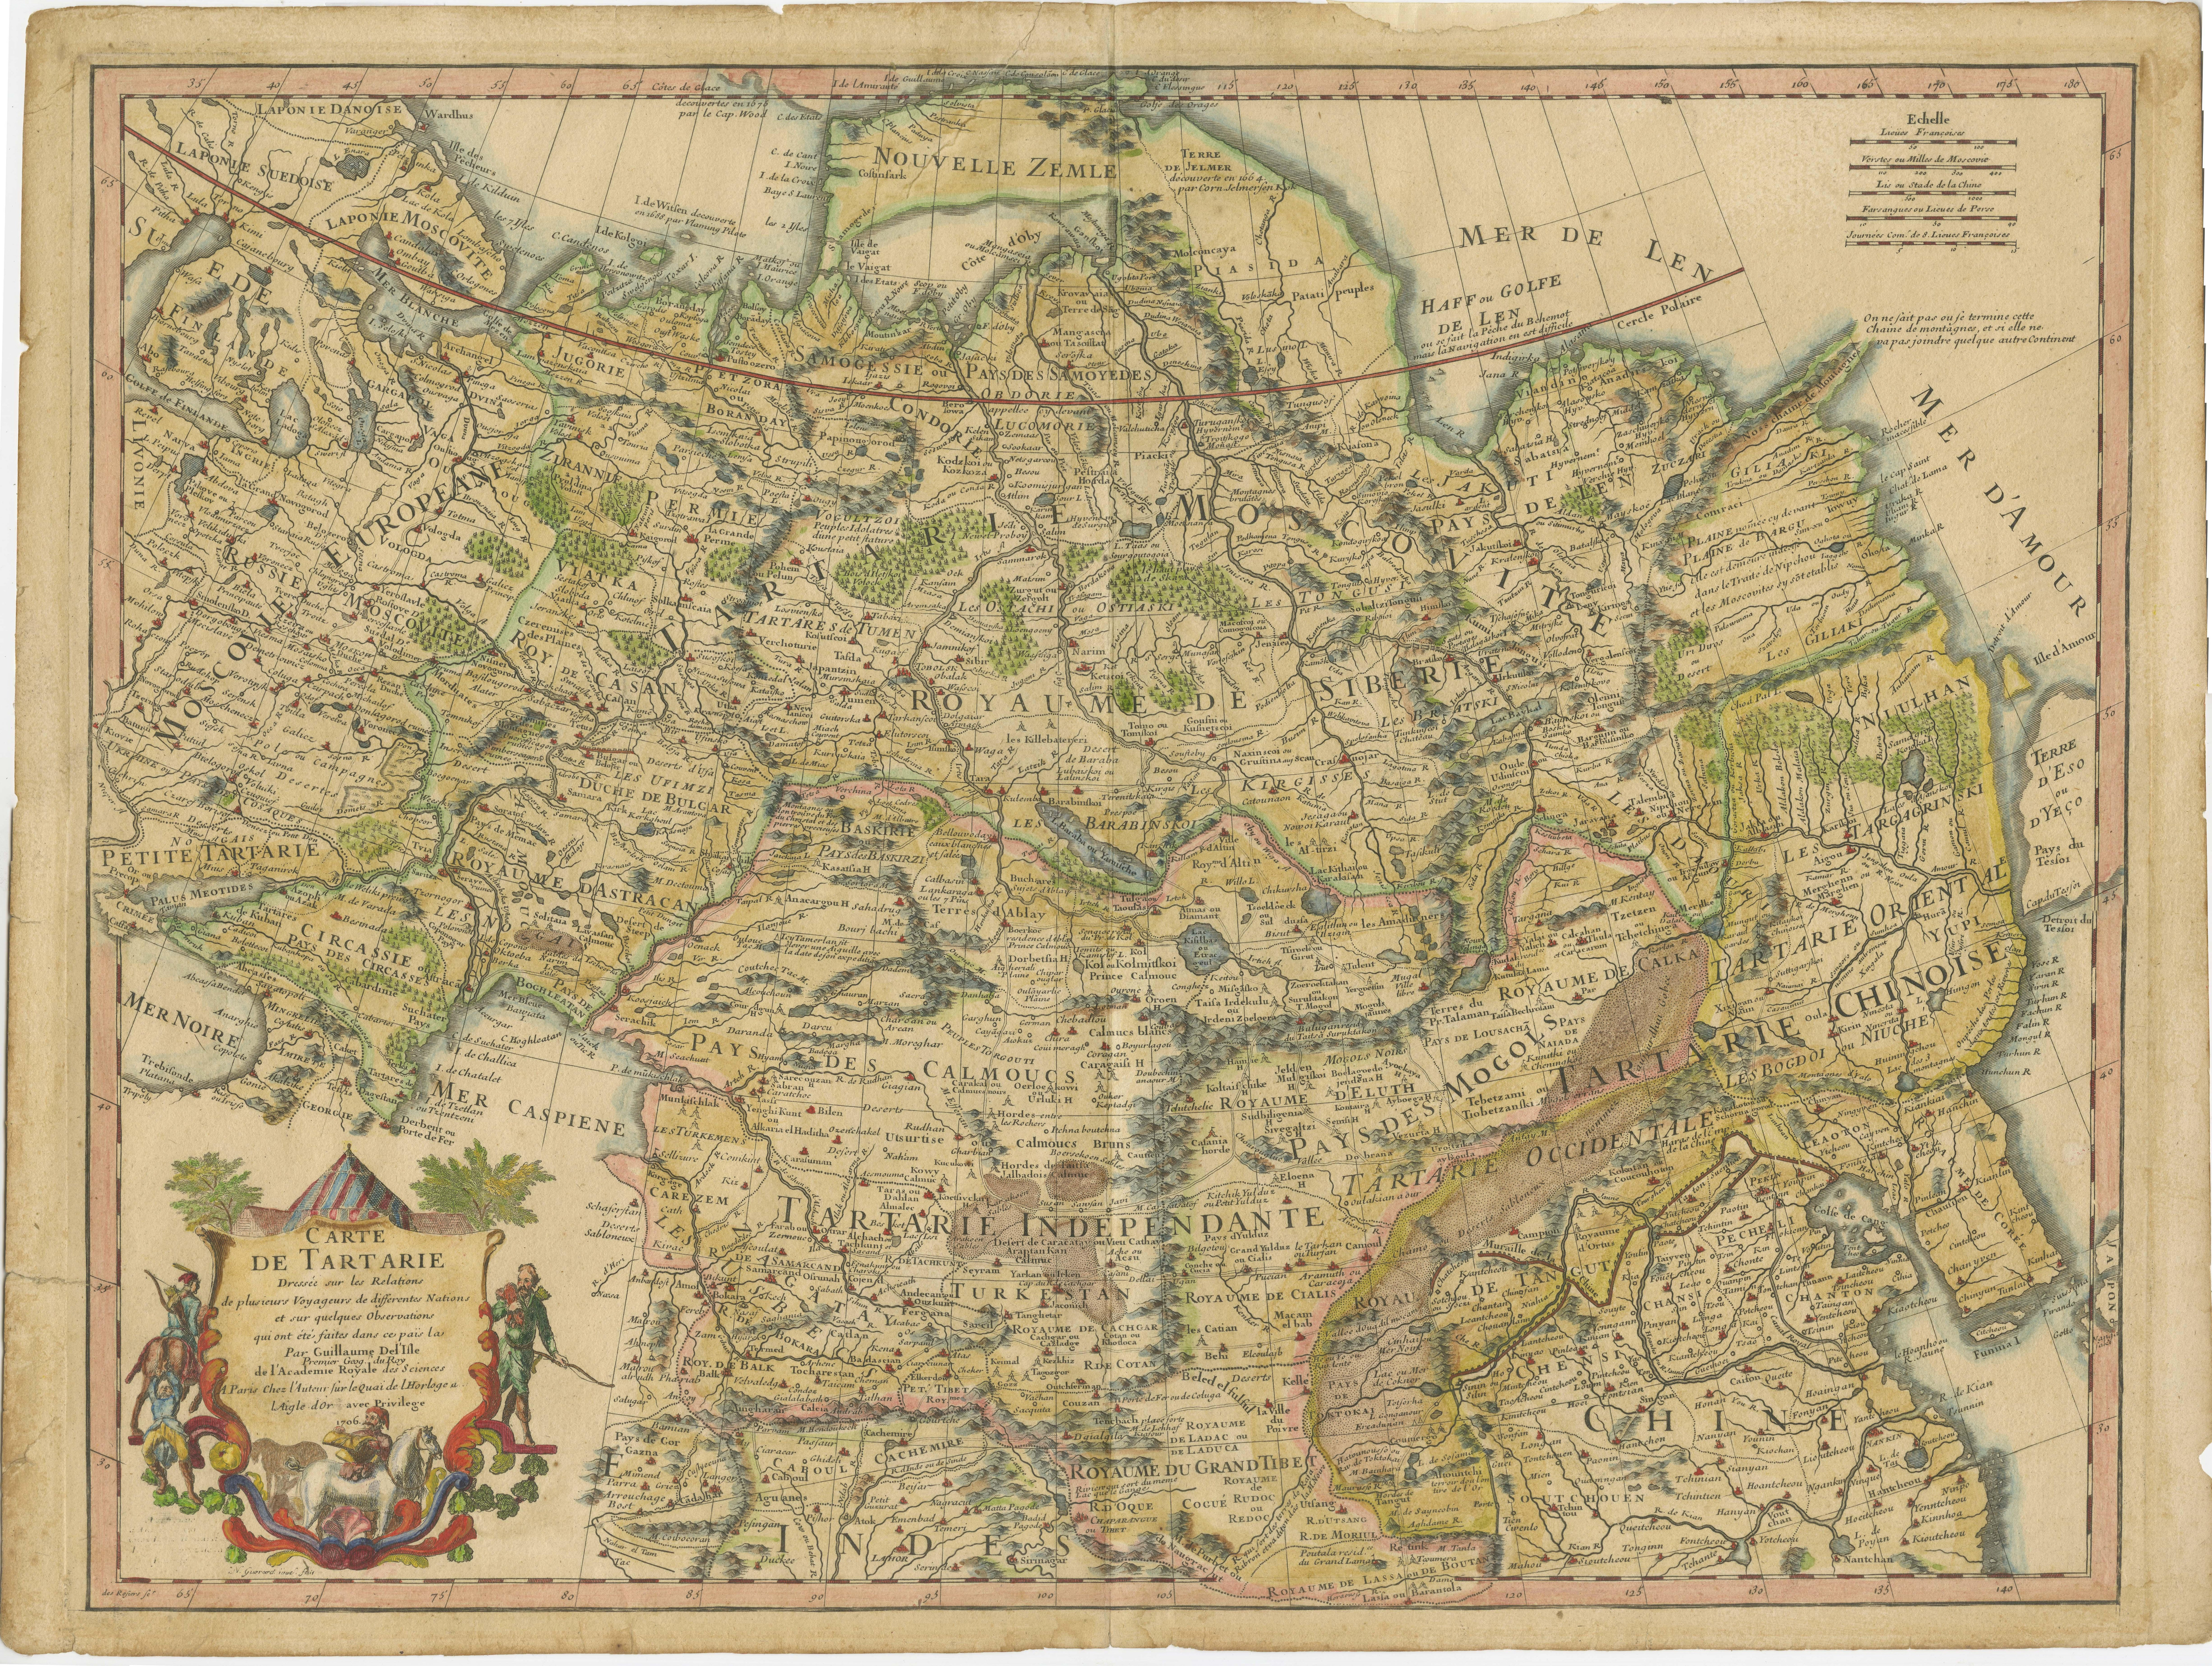 Antique map titled 'Carte de Tartarie'. Detailed map of Tartary, consisting of the Eastern part of Russia, Central Asia, China and Korea, first published by Guillaume De L'Isle in 1706. The map extends from the Peninsula of Korea in the east to the